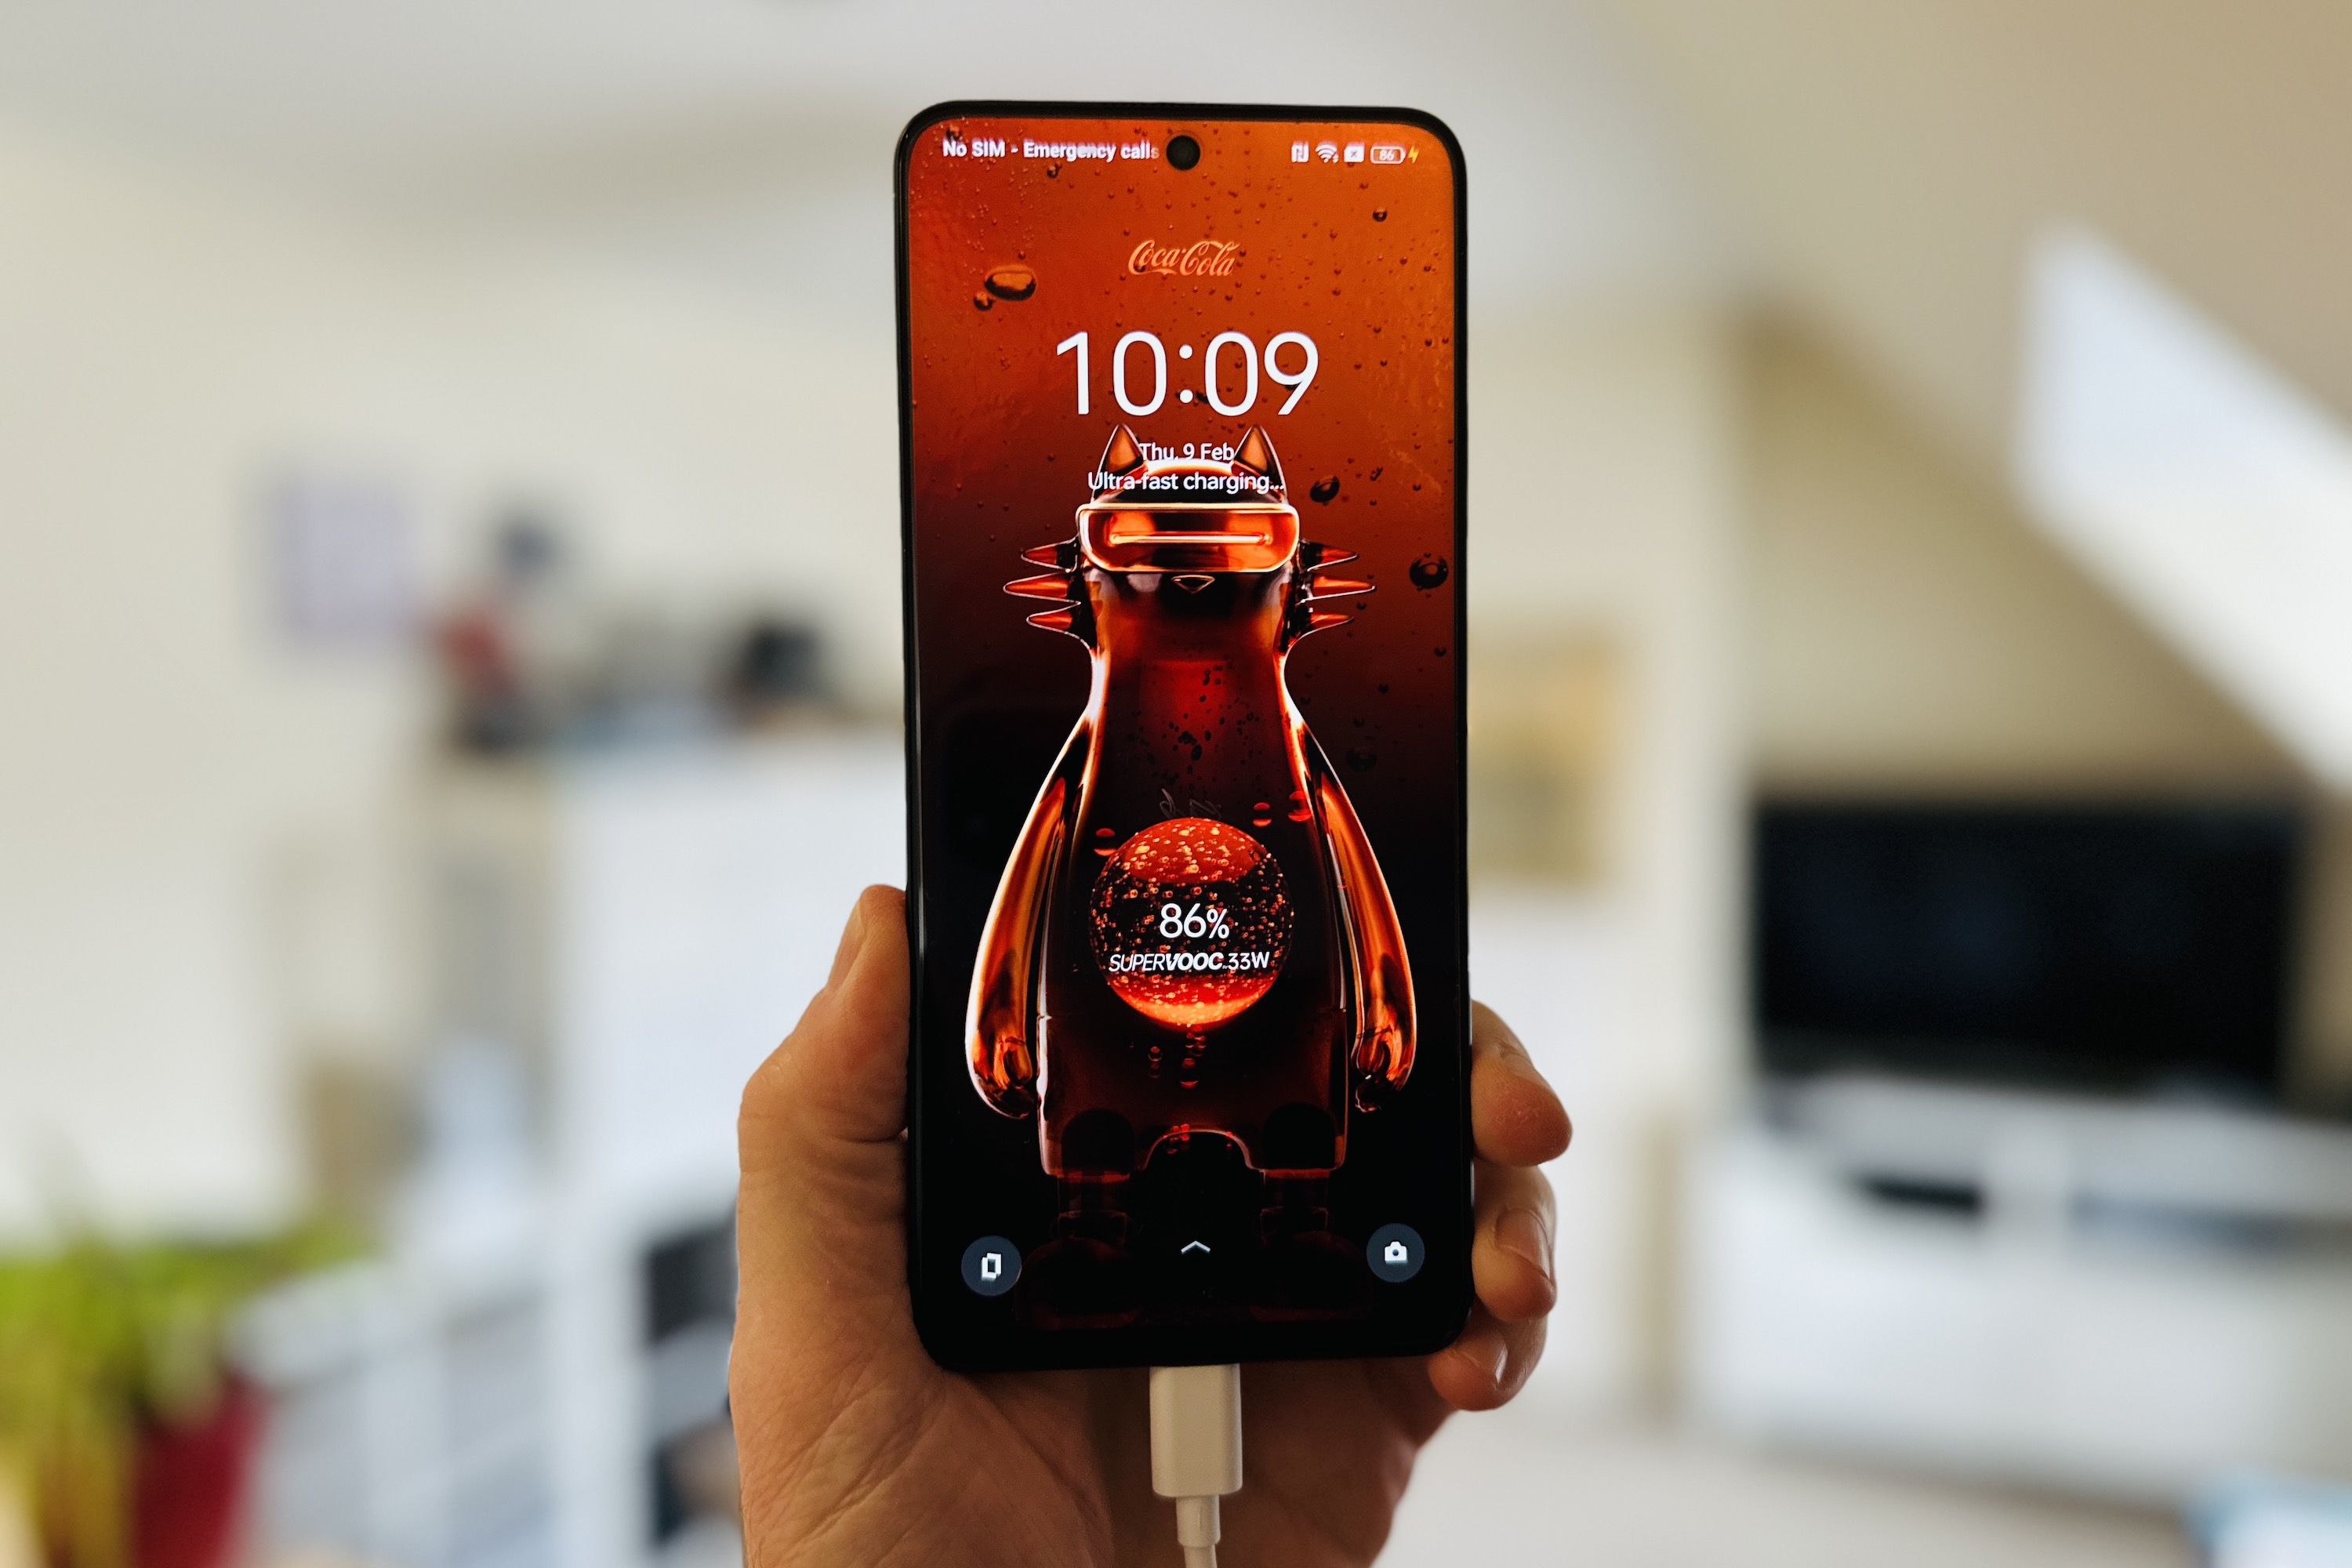 The charging animation on the Realme X Coca-Cola phone.